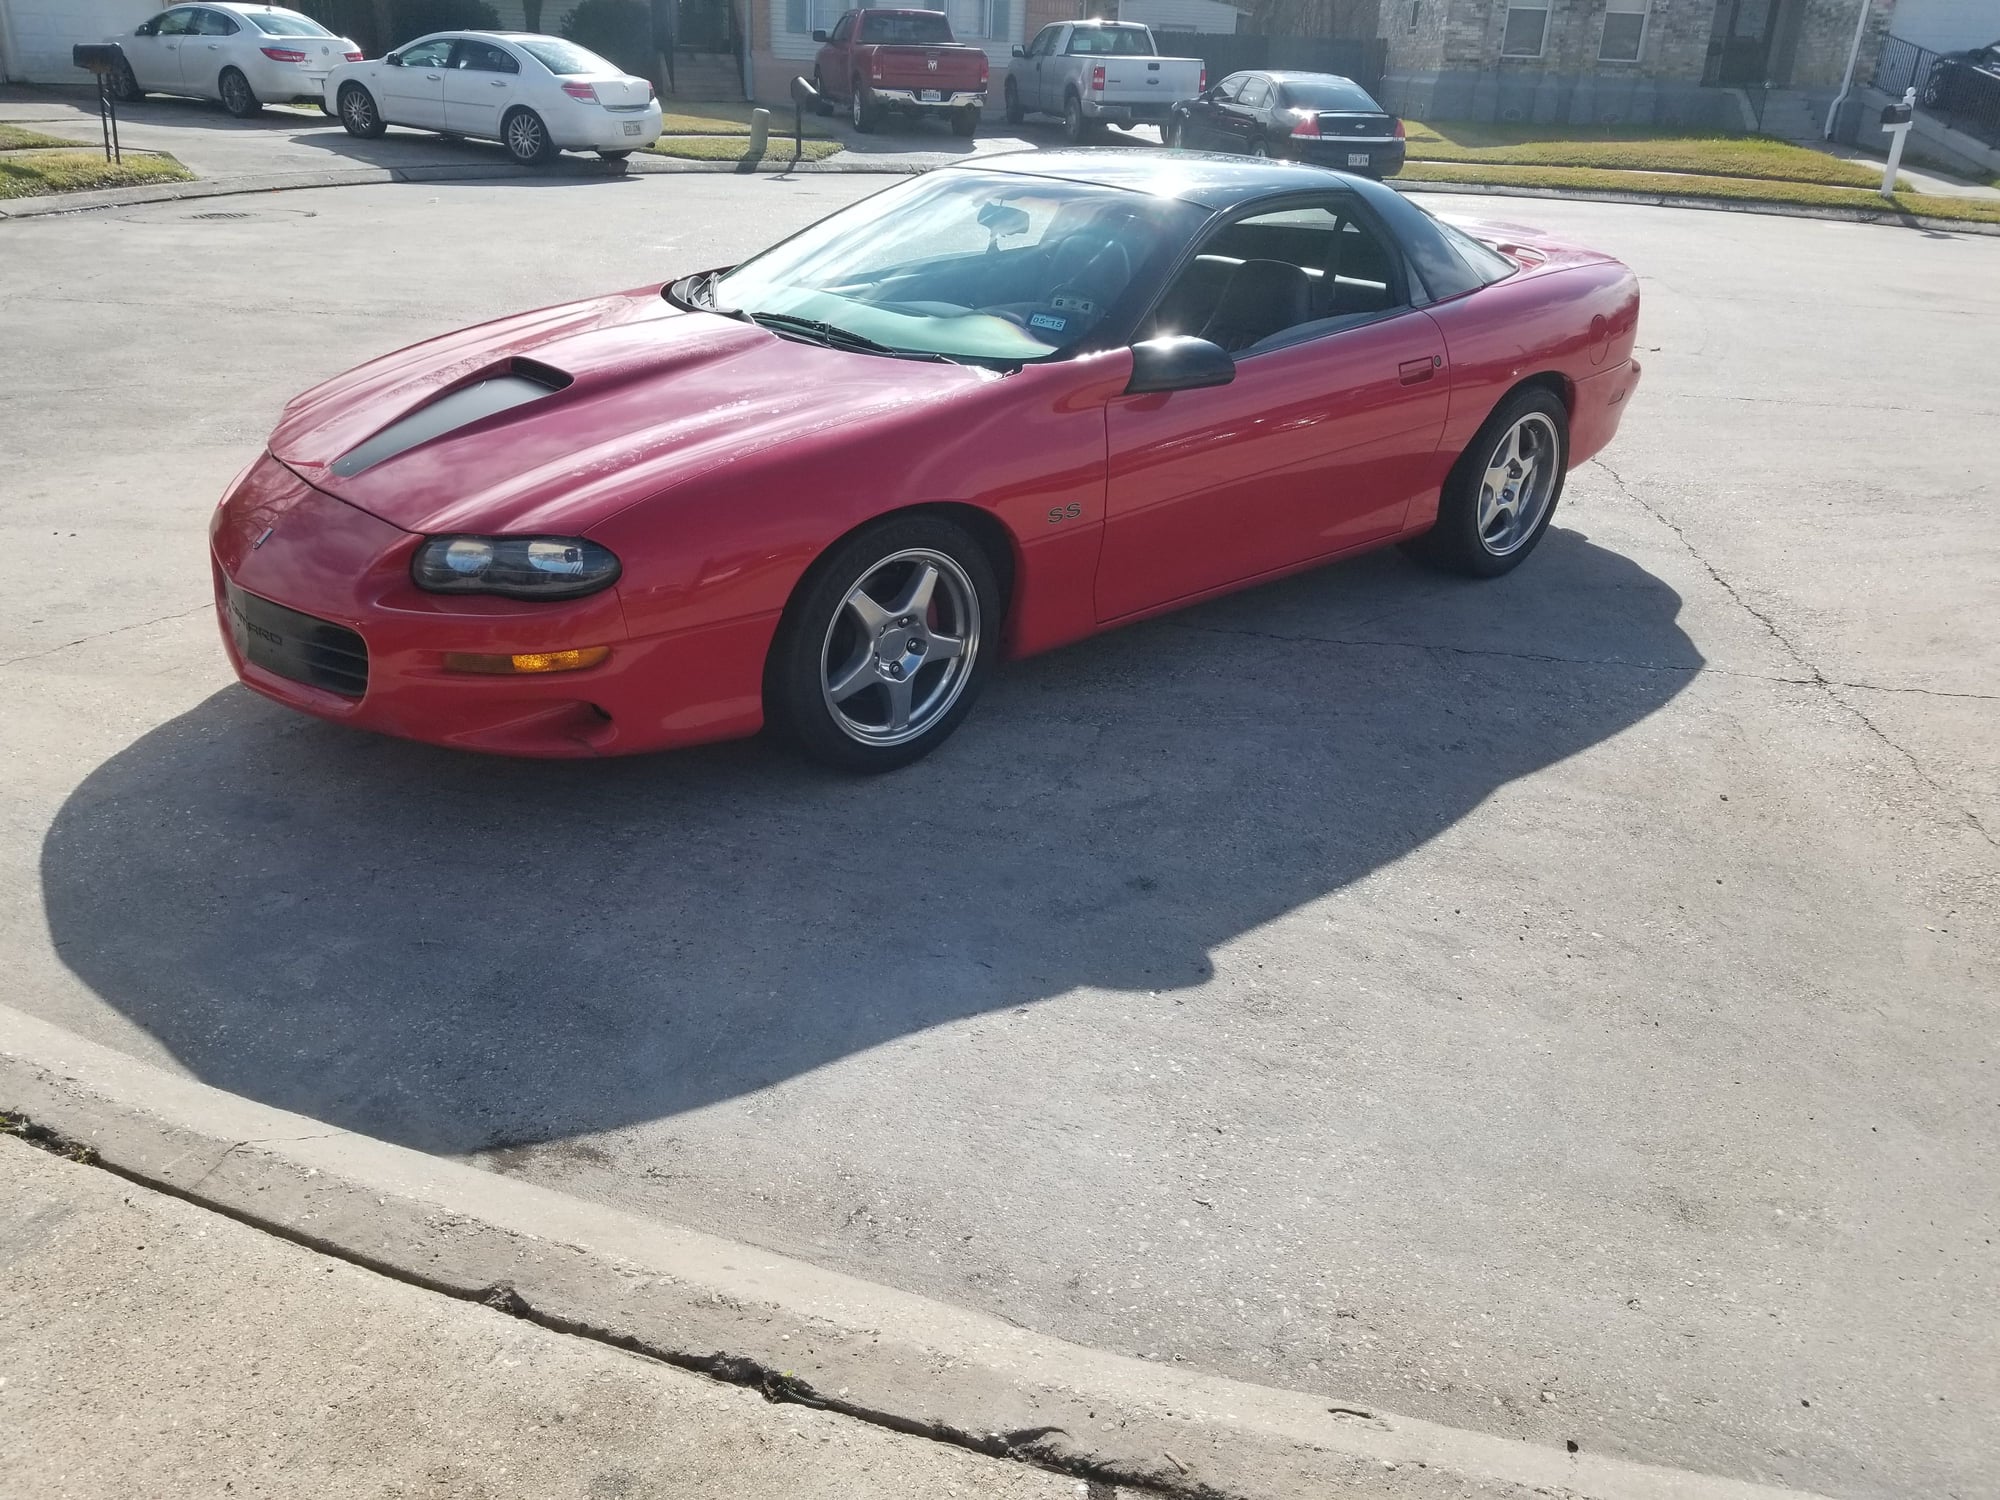 1999 Chevrolet Camaro - 1999 Slp SS Camaro - Used - VIN 2G1FP22G9X2121705 - 81,574 Miles - 8 cyl - 2WD - Manual - Coupe - Red - New Orleans, LA 70127, United States